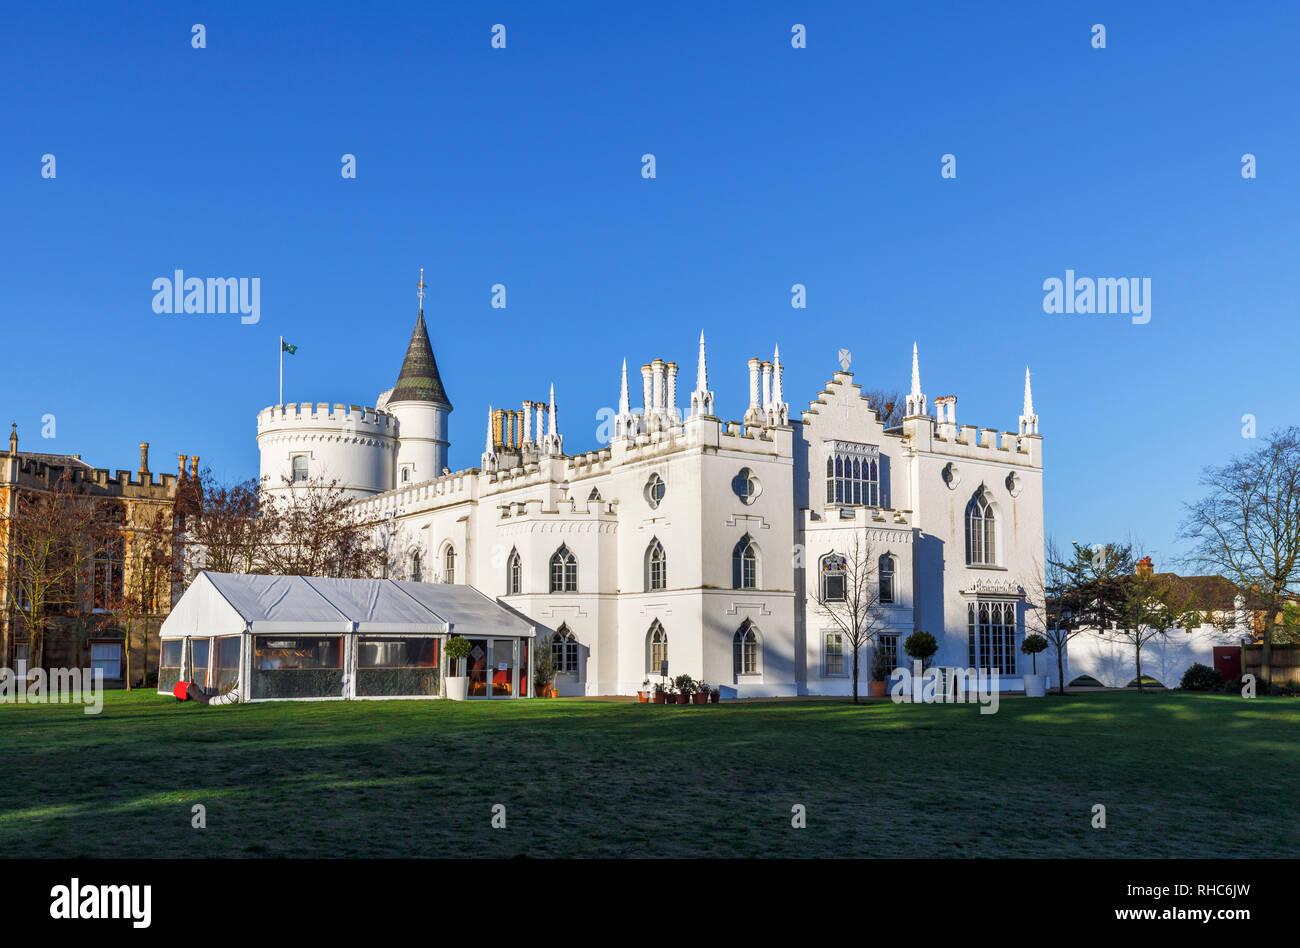 Side view of Strawberry Hill House with its round tower, turret and battlements, a Gothic Revival villa in Twickenham, London built by Horace Walpole Stock Photo